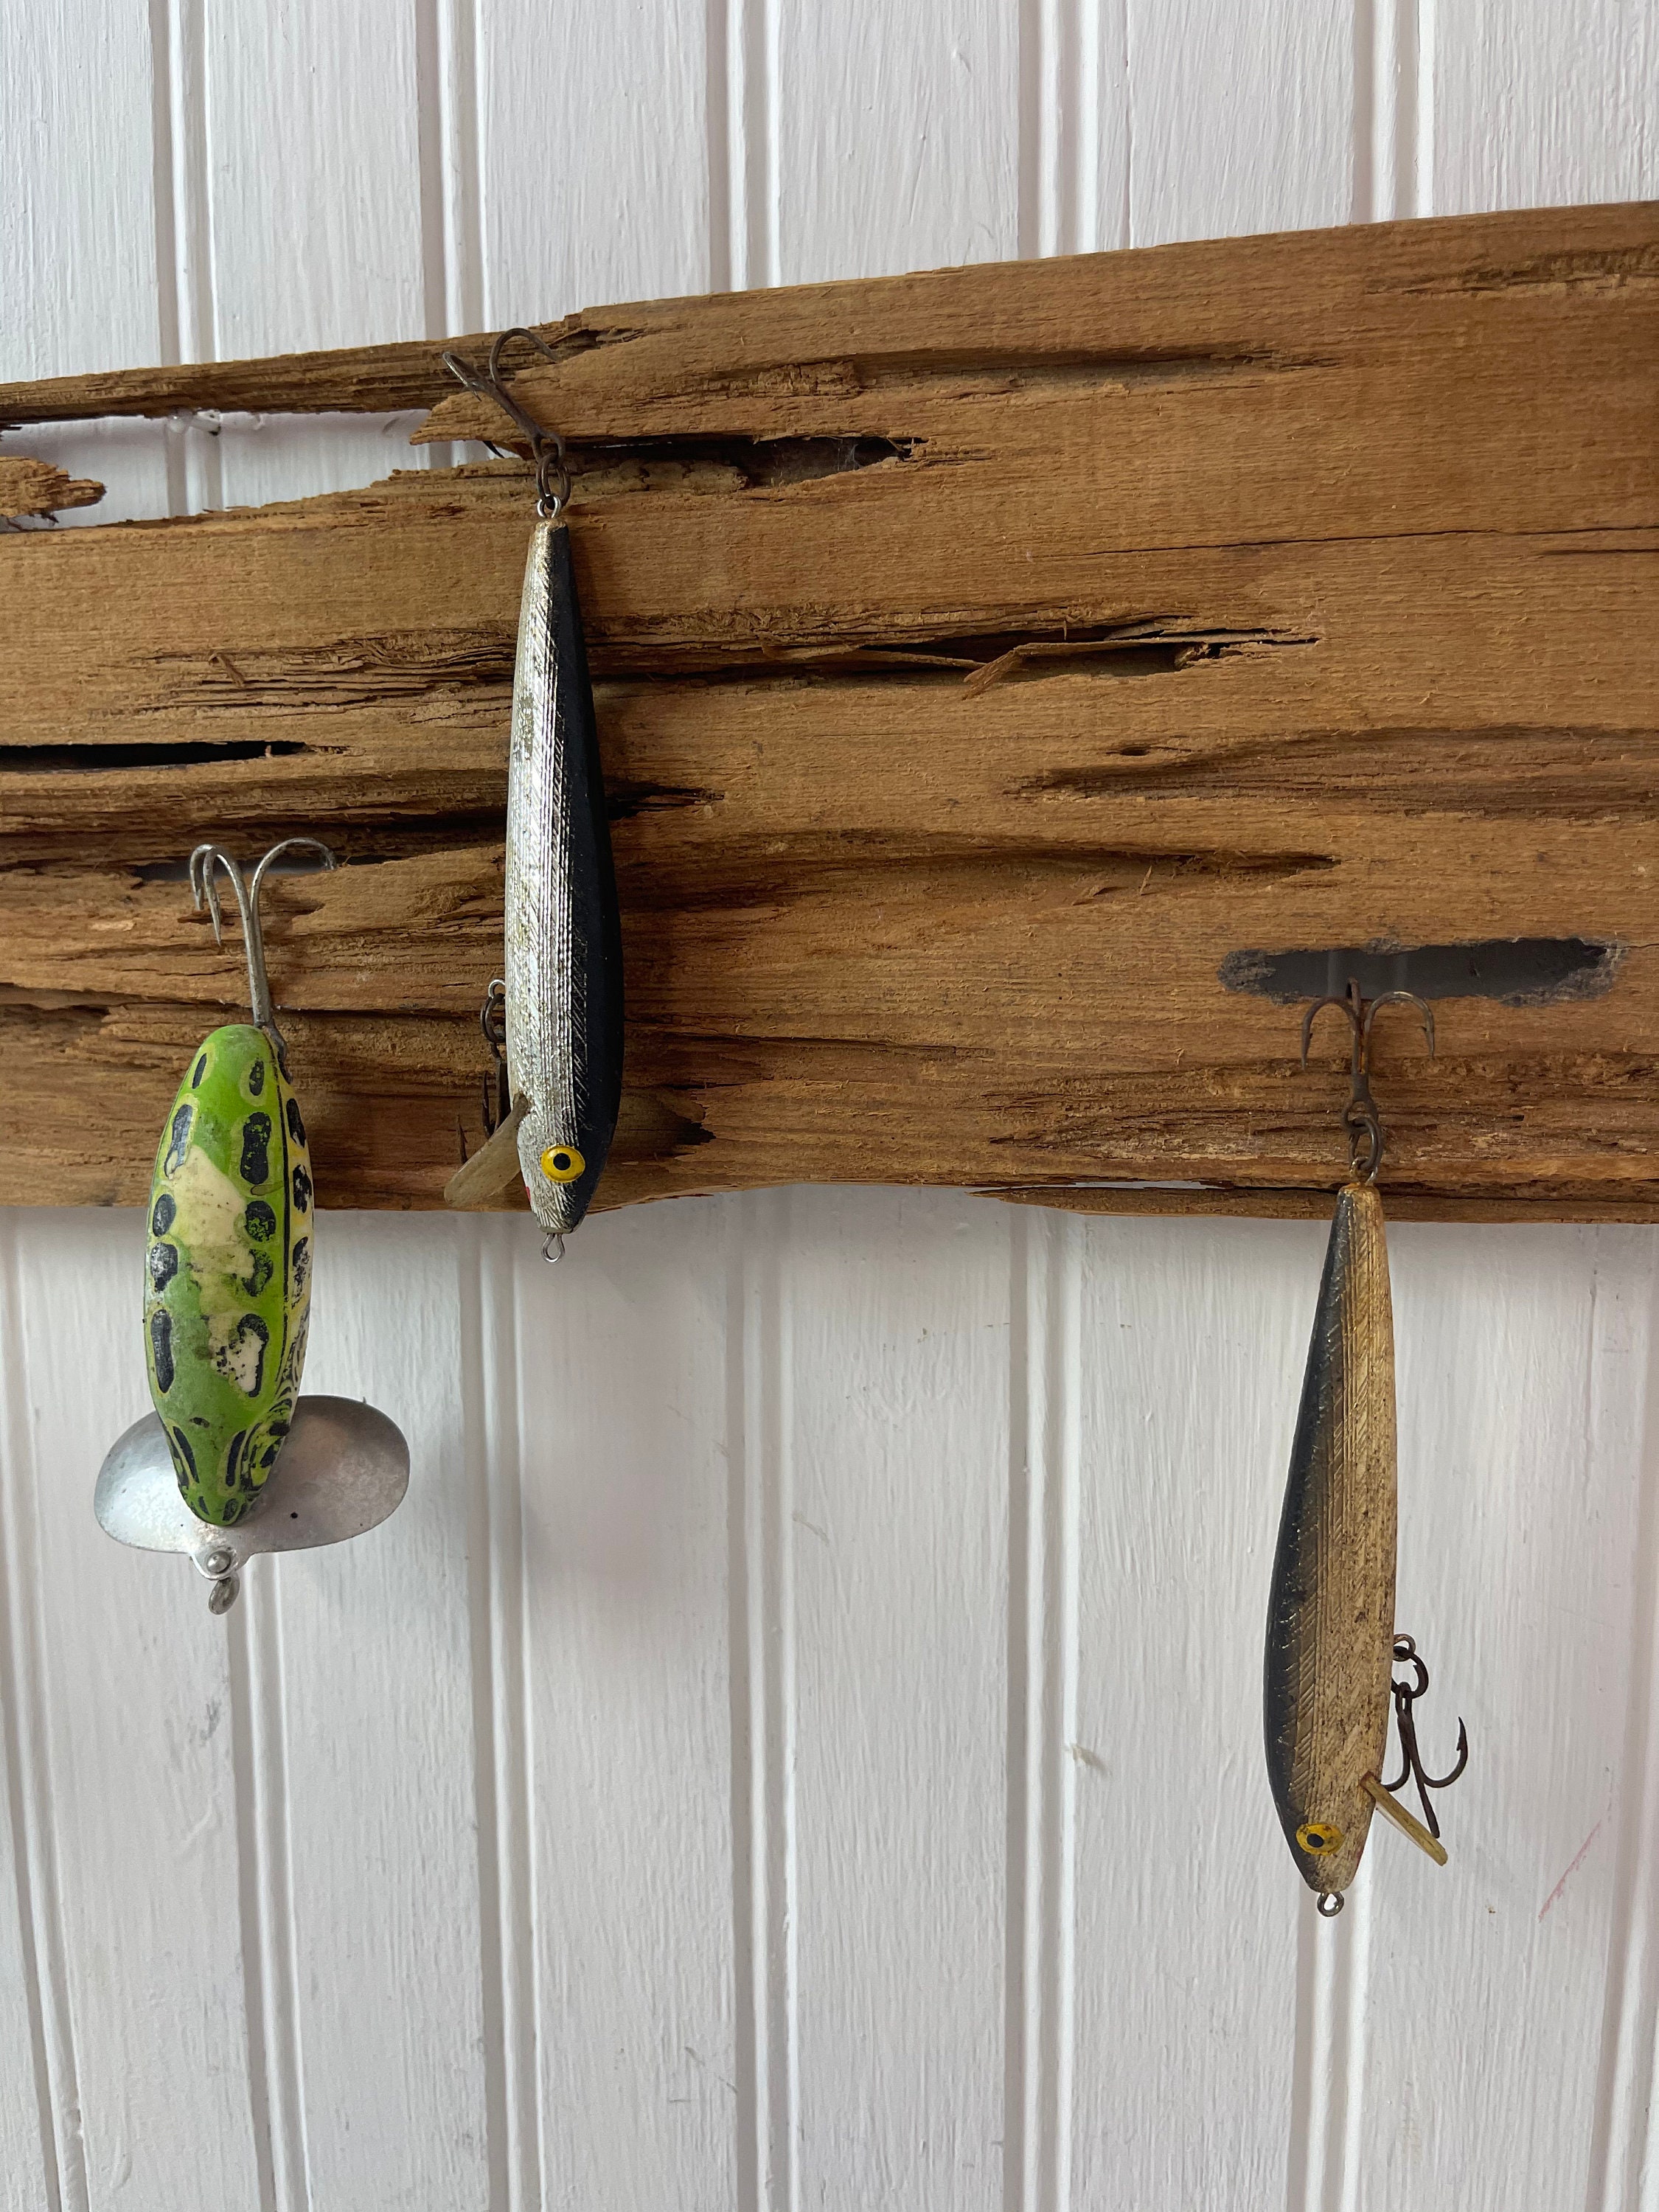 Vintage Fishing Lure Collection, Fishing Lure, Outdoors, Camping